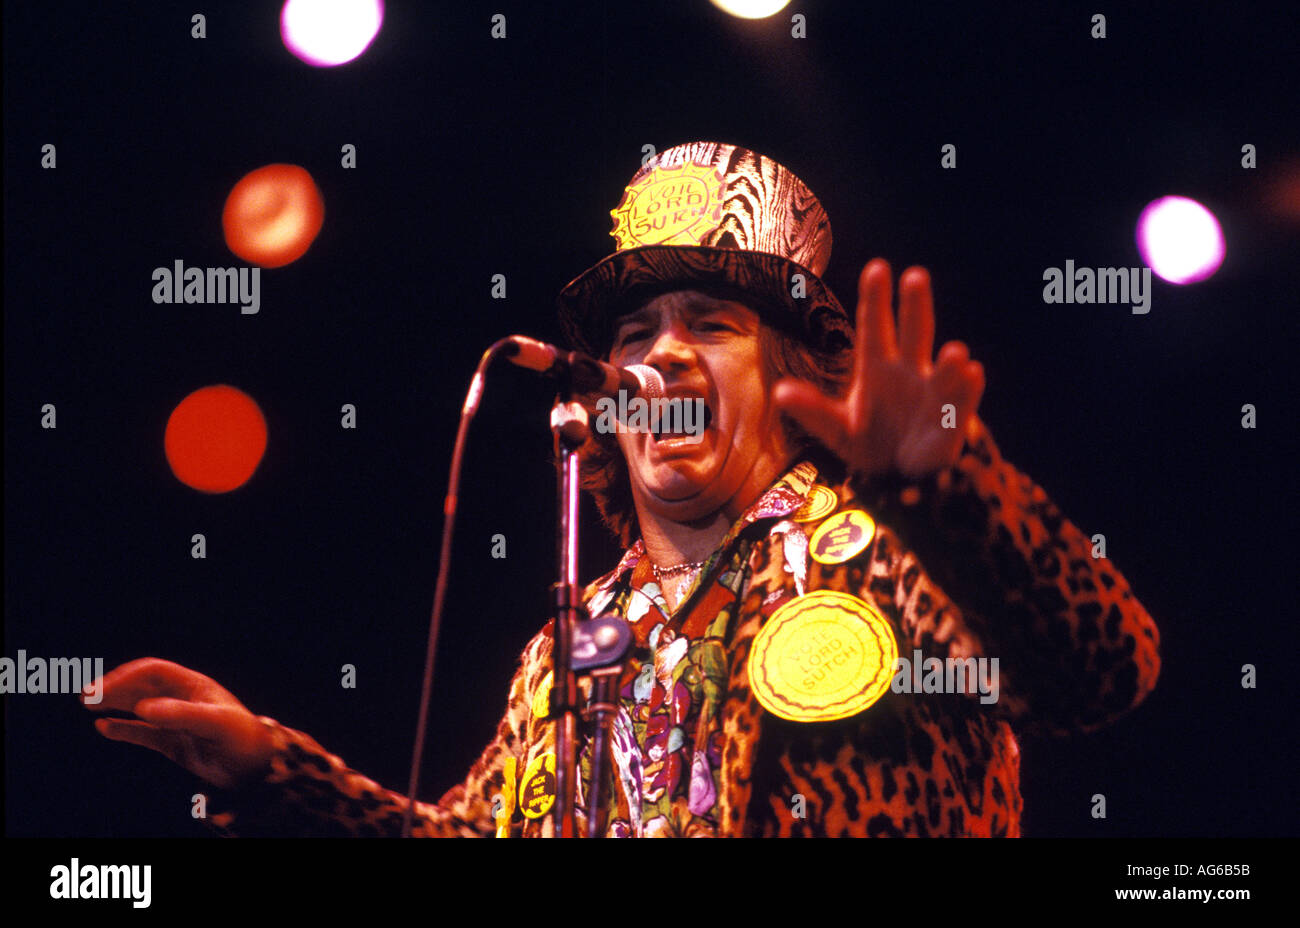 Screaming Lord Sutch in concert Stock Photo